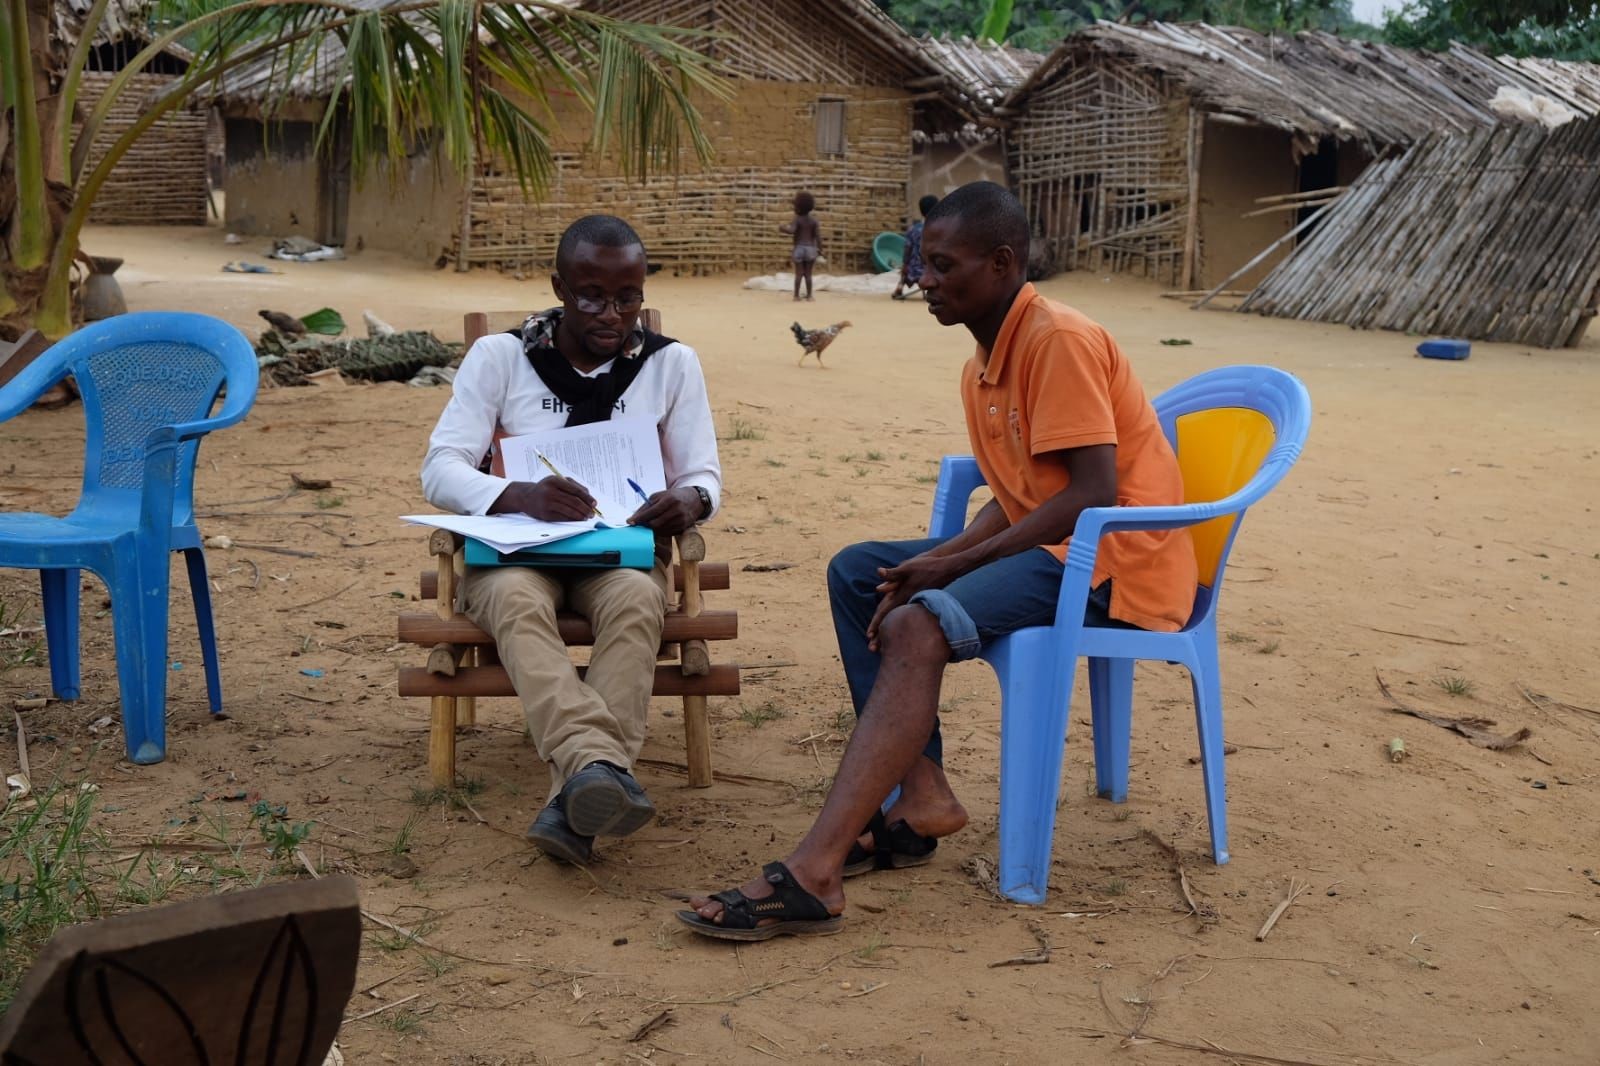 Research for Community Access Partnership (ReCAP): Understanding the Use of Two and Three-Wheelers in the Democratic Republic of the Congo (DRC)